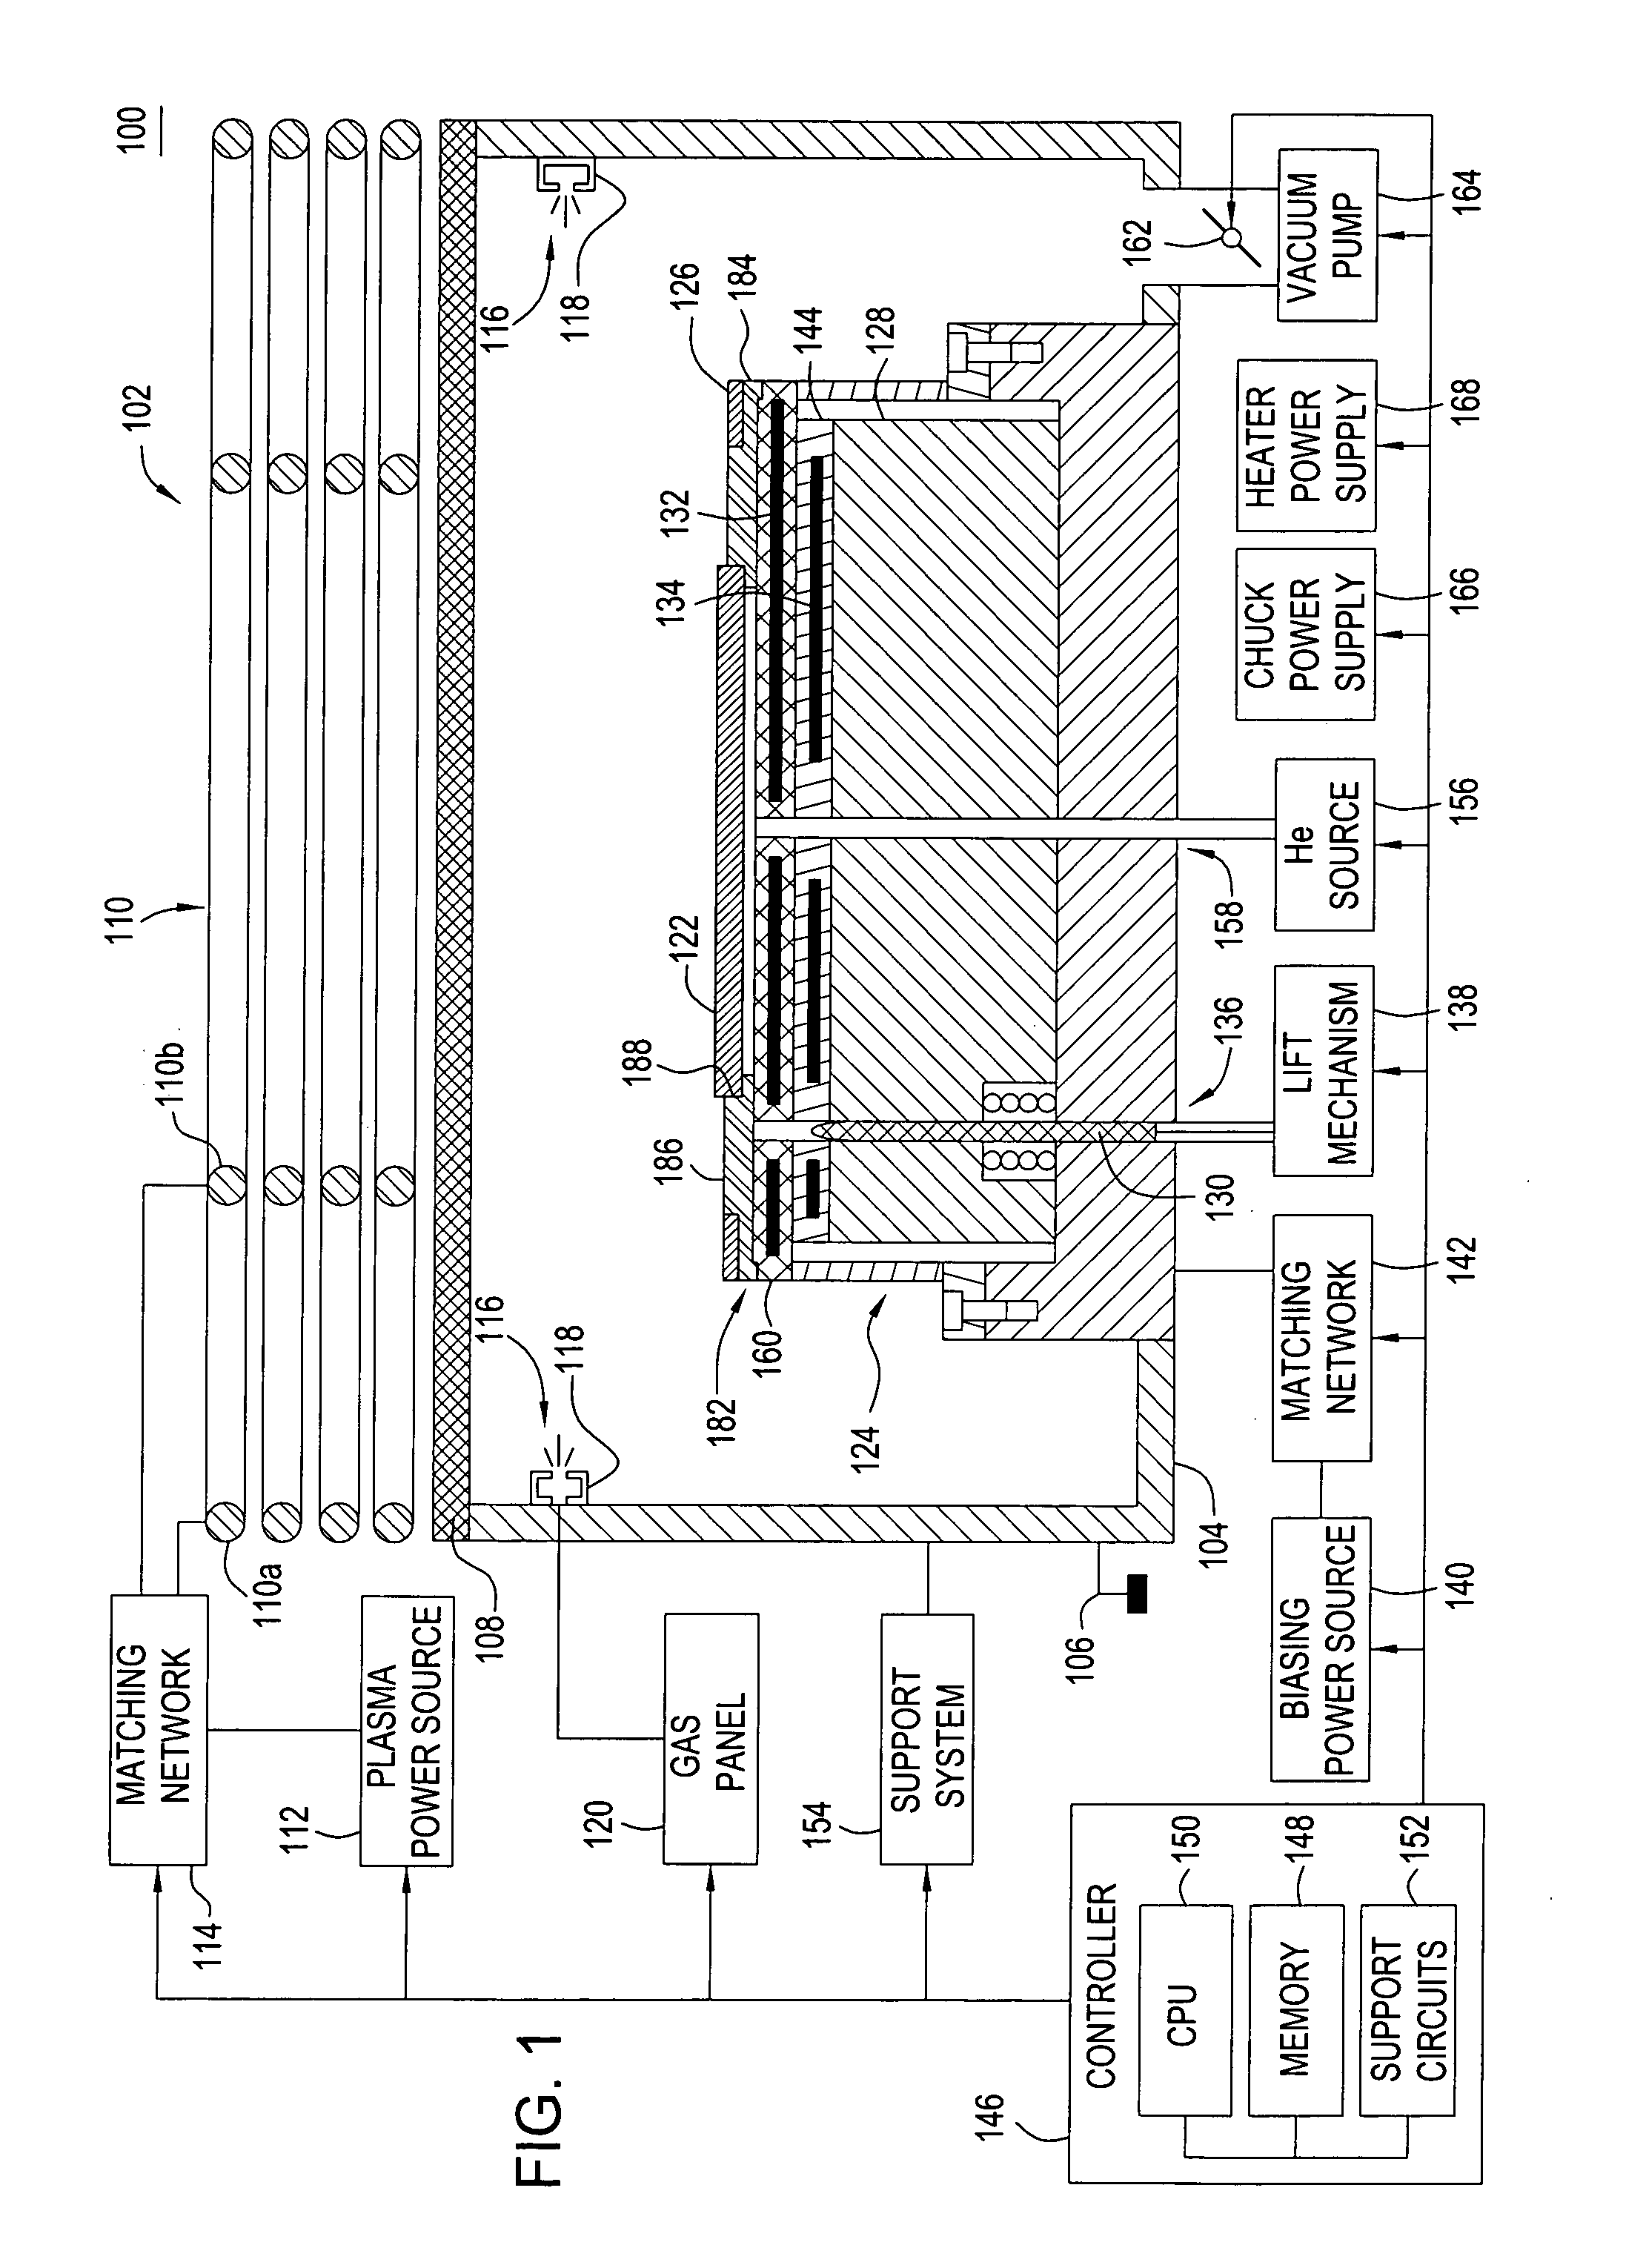 Method for etching a molybdenum layer suitable for photomask fabrication